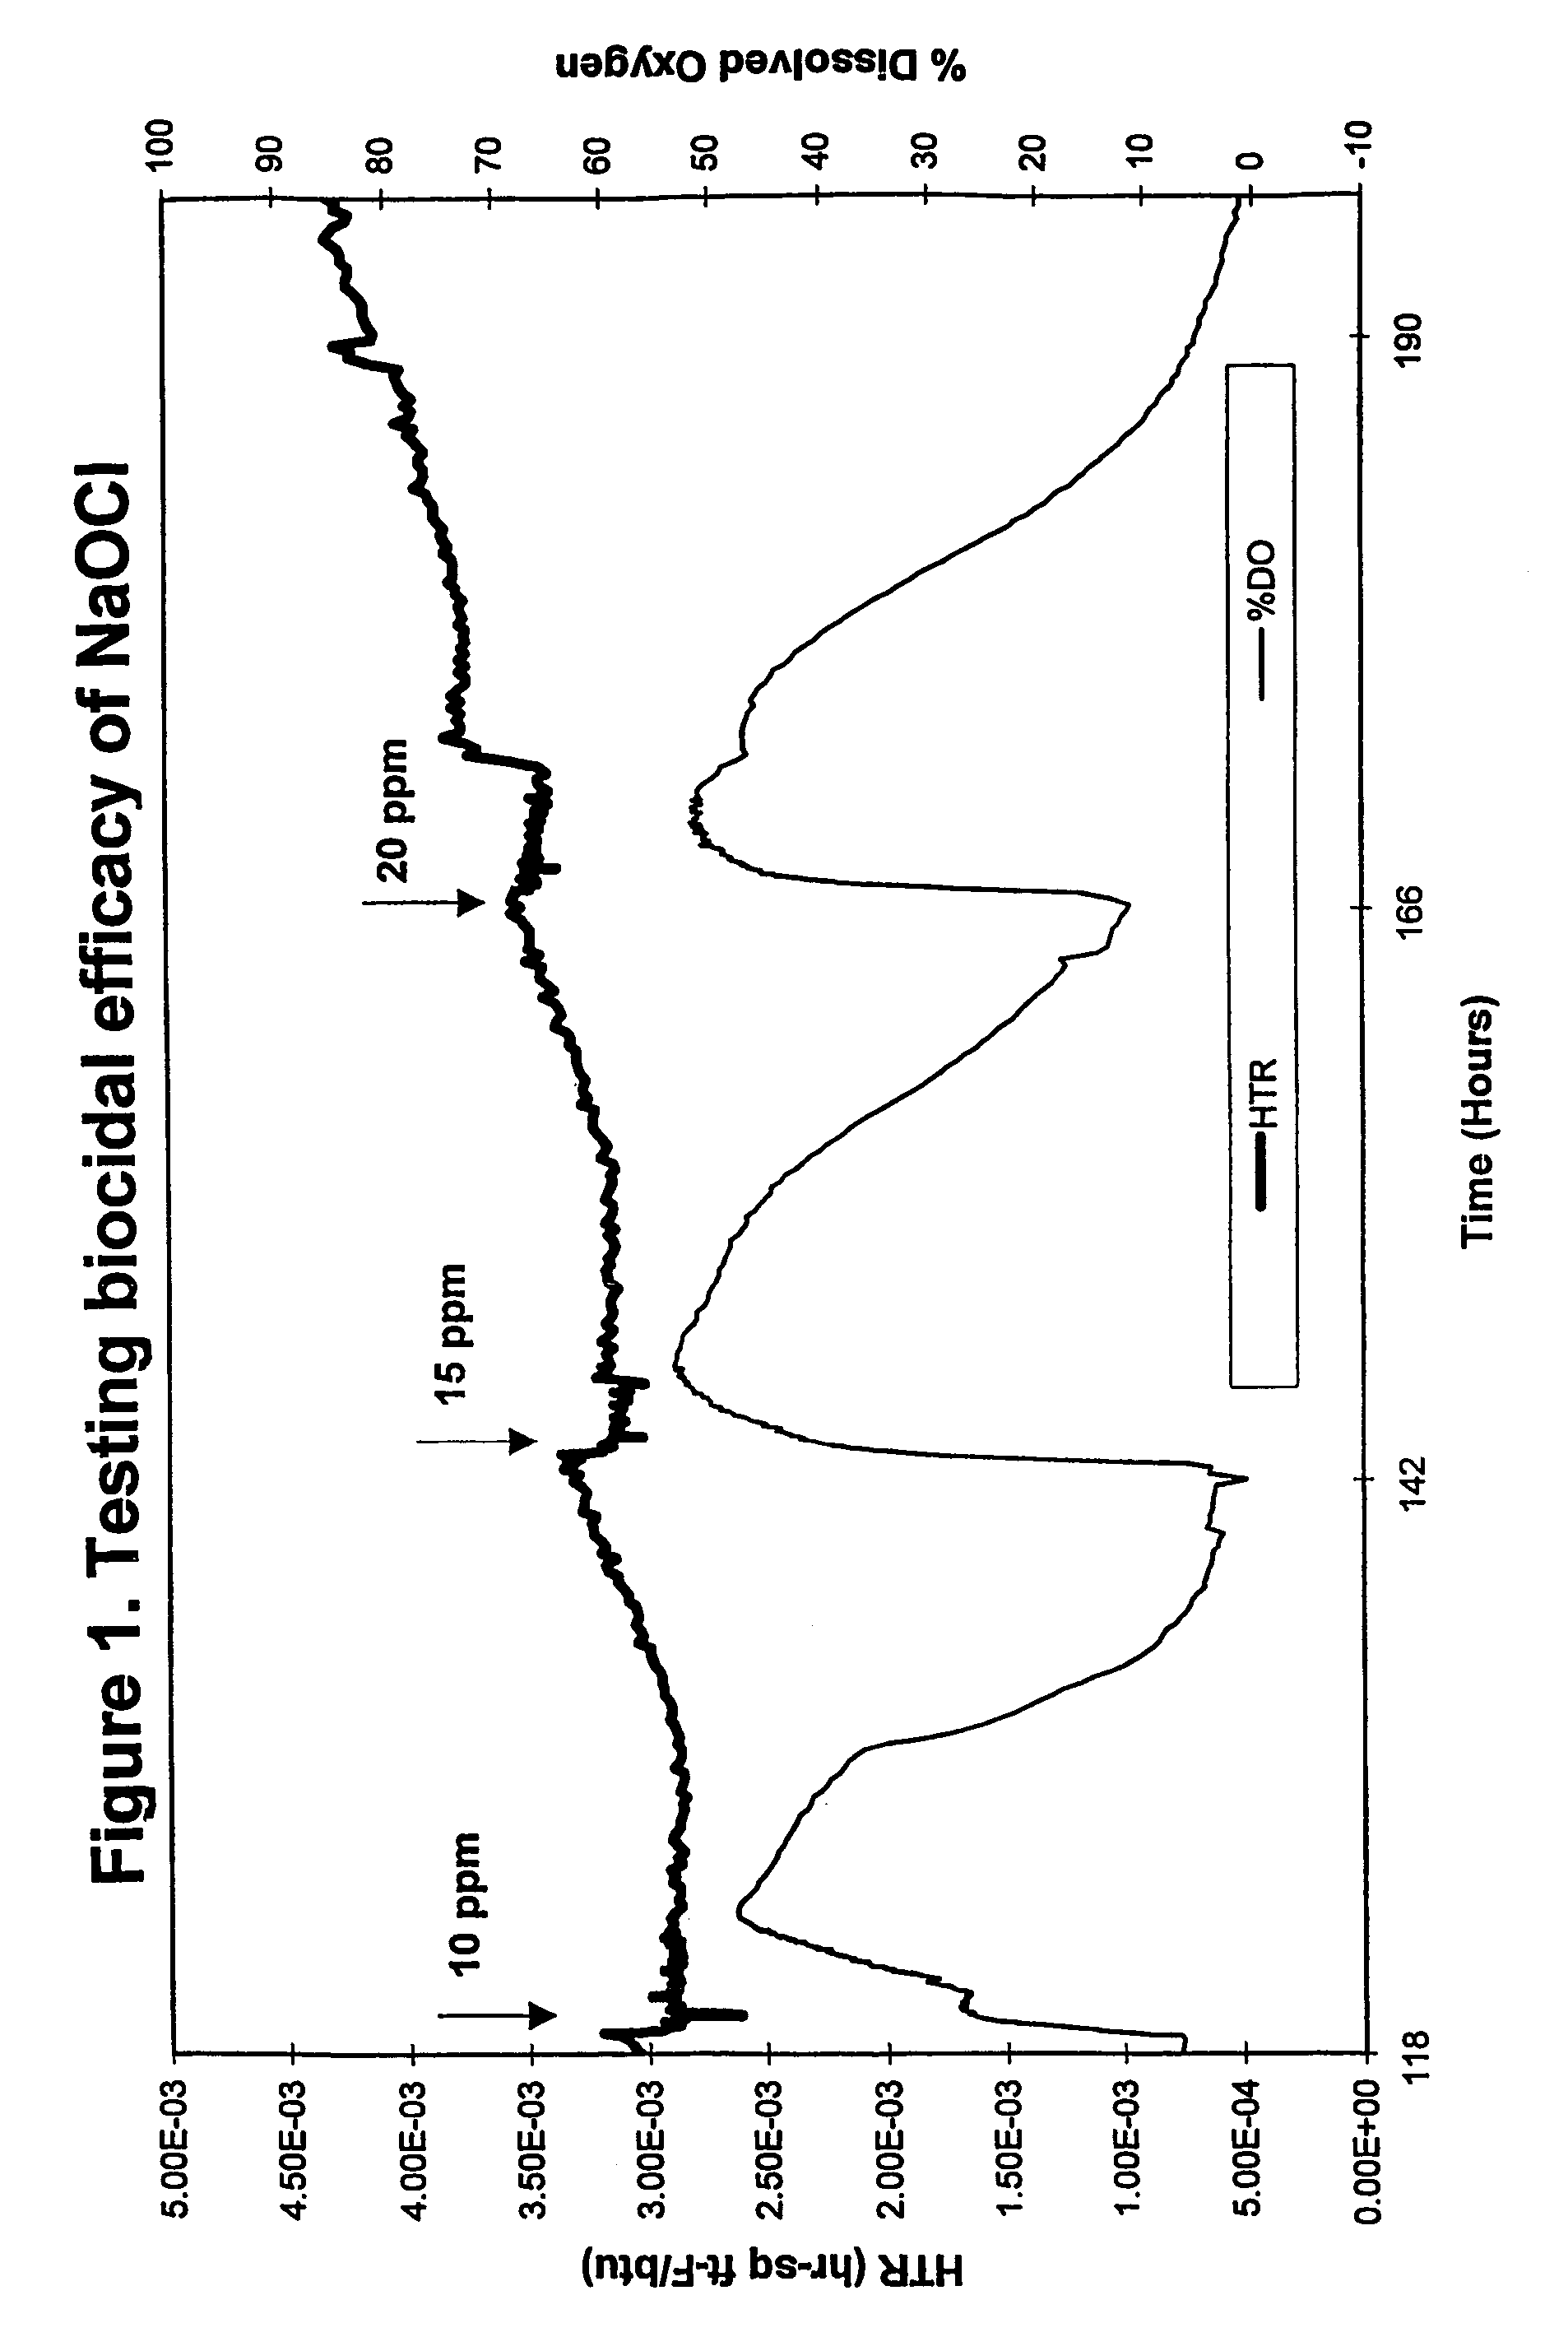 Method for removal of biofilm